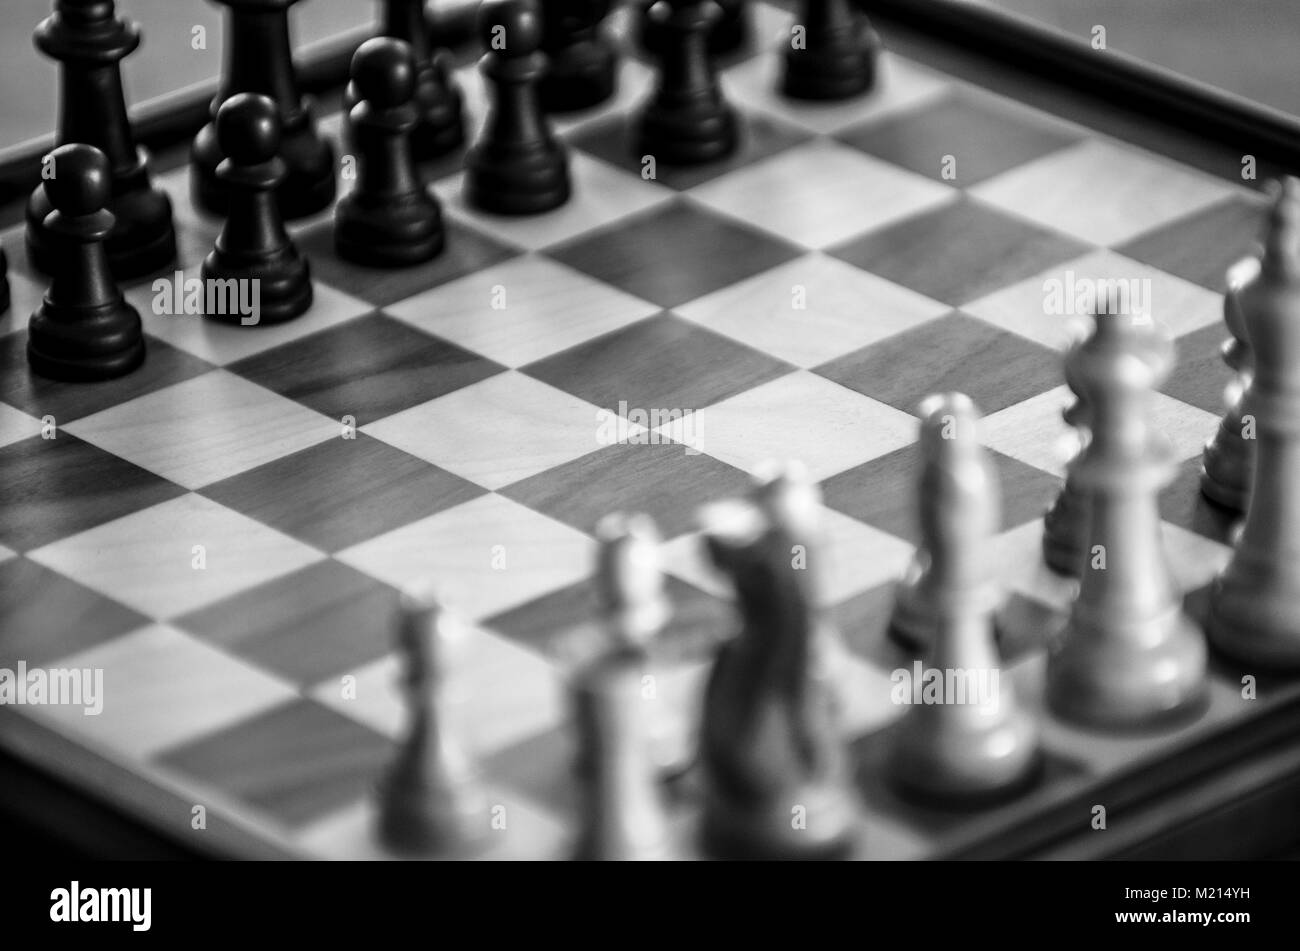 Cropped view of woodgrain chessboard with pieces blurred in starting positions, arranged diagonally and viewed at oblique angle, monochrome image Stock Photo